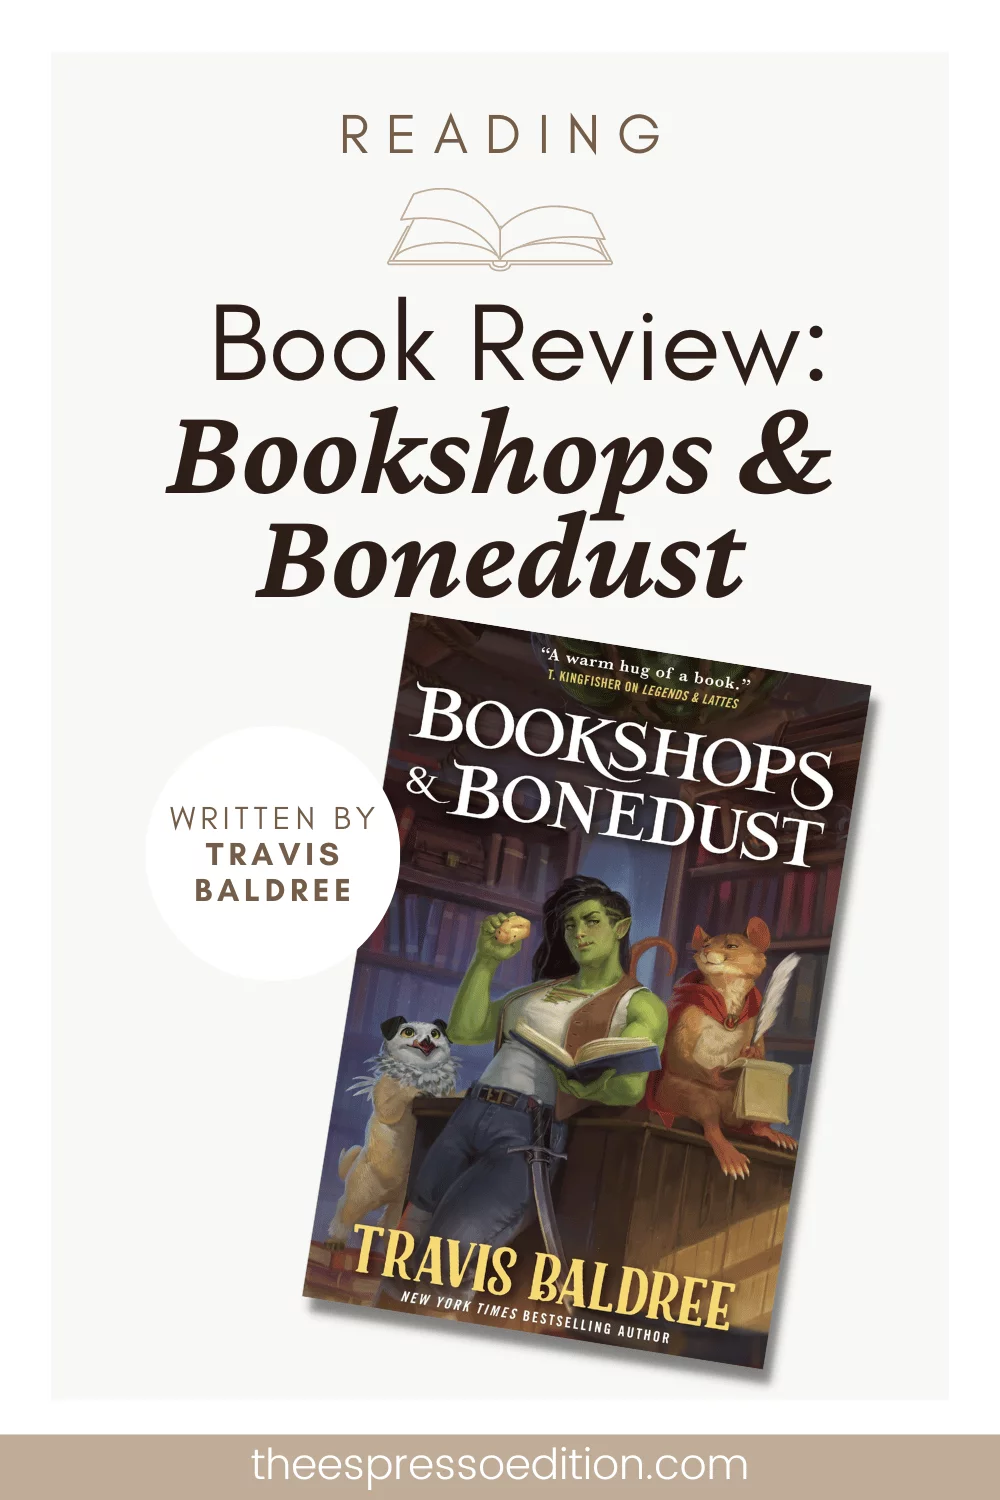 Book Review: Bookshops & Bonedust by Travis Baldree by The Espresso Edition cozy bookish blog